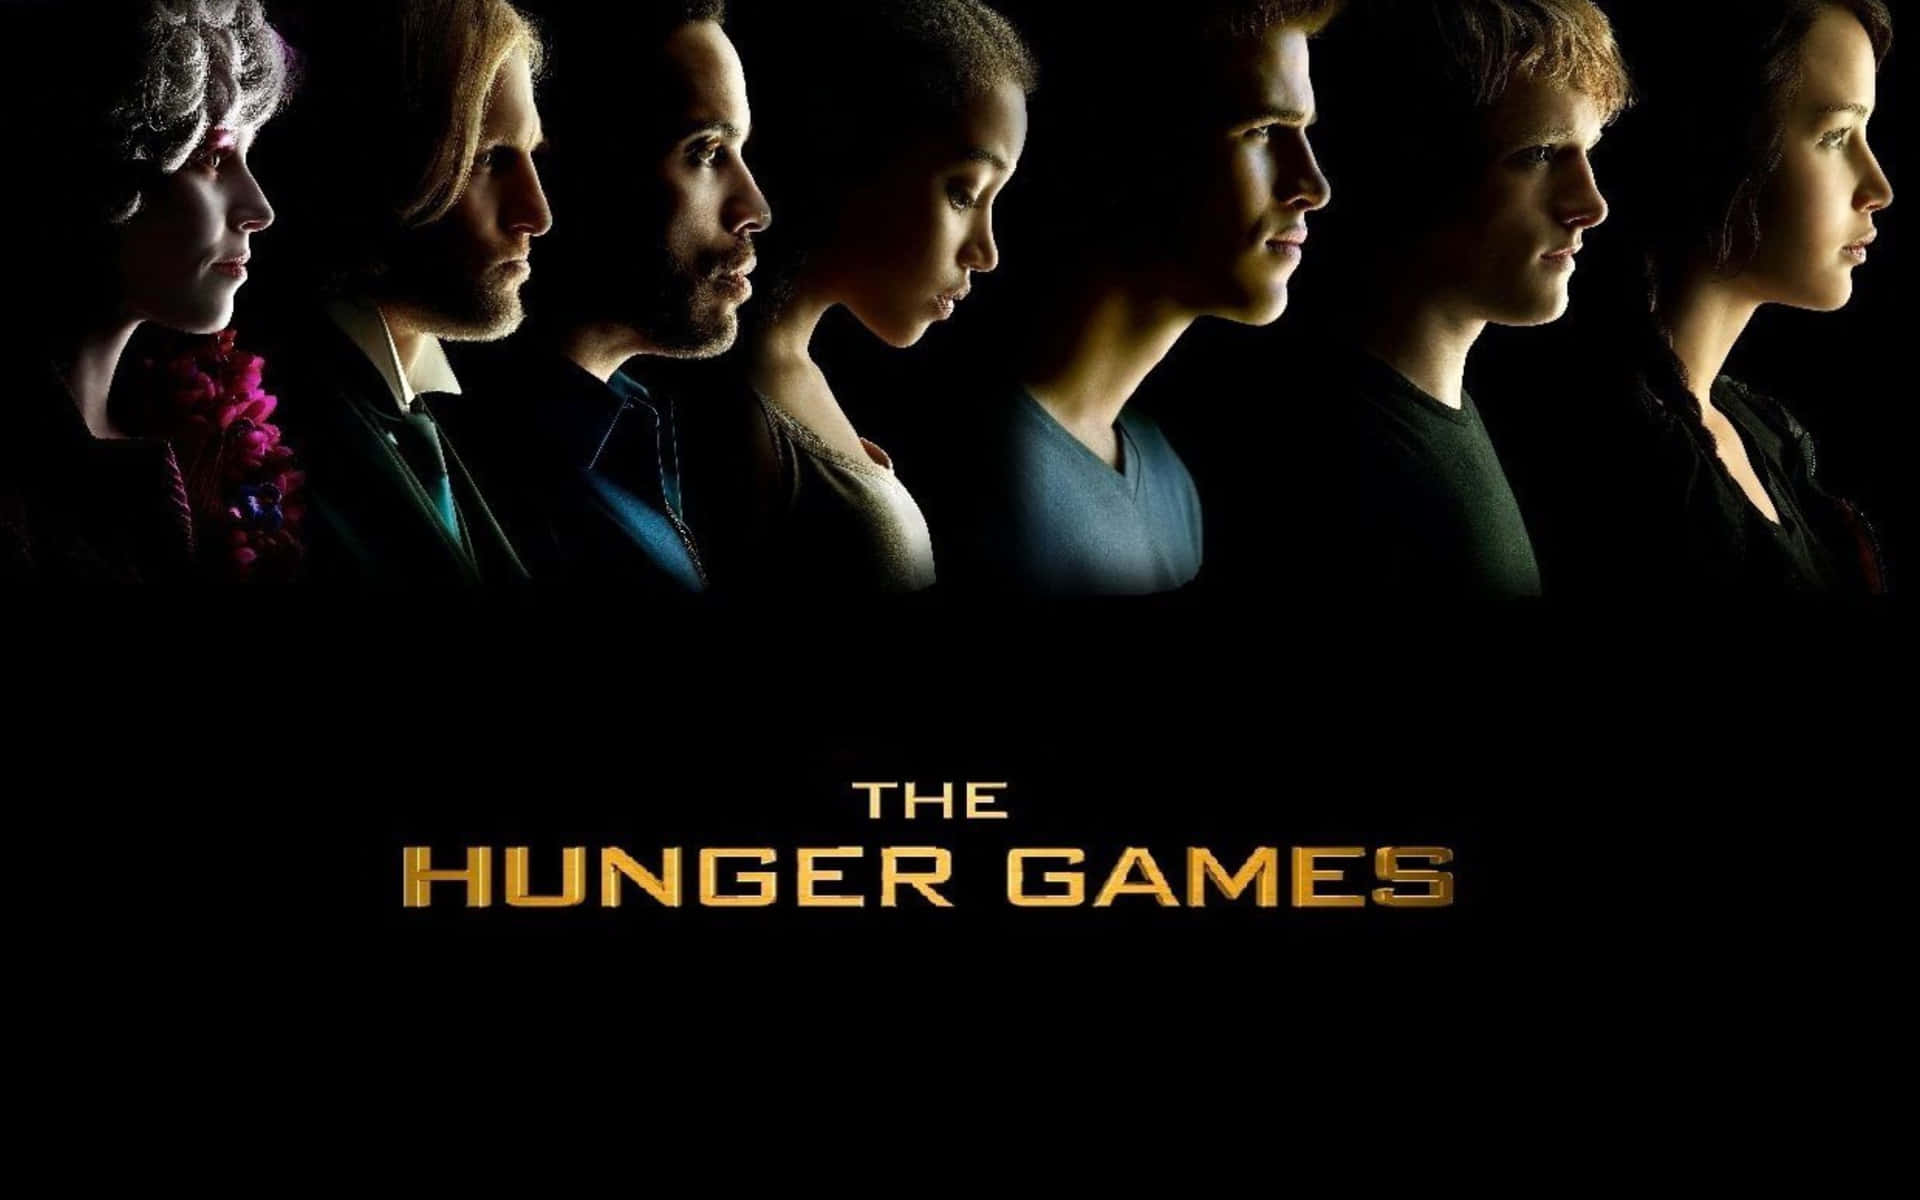 Hunger games 2. The Hunger games 2012 poster.